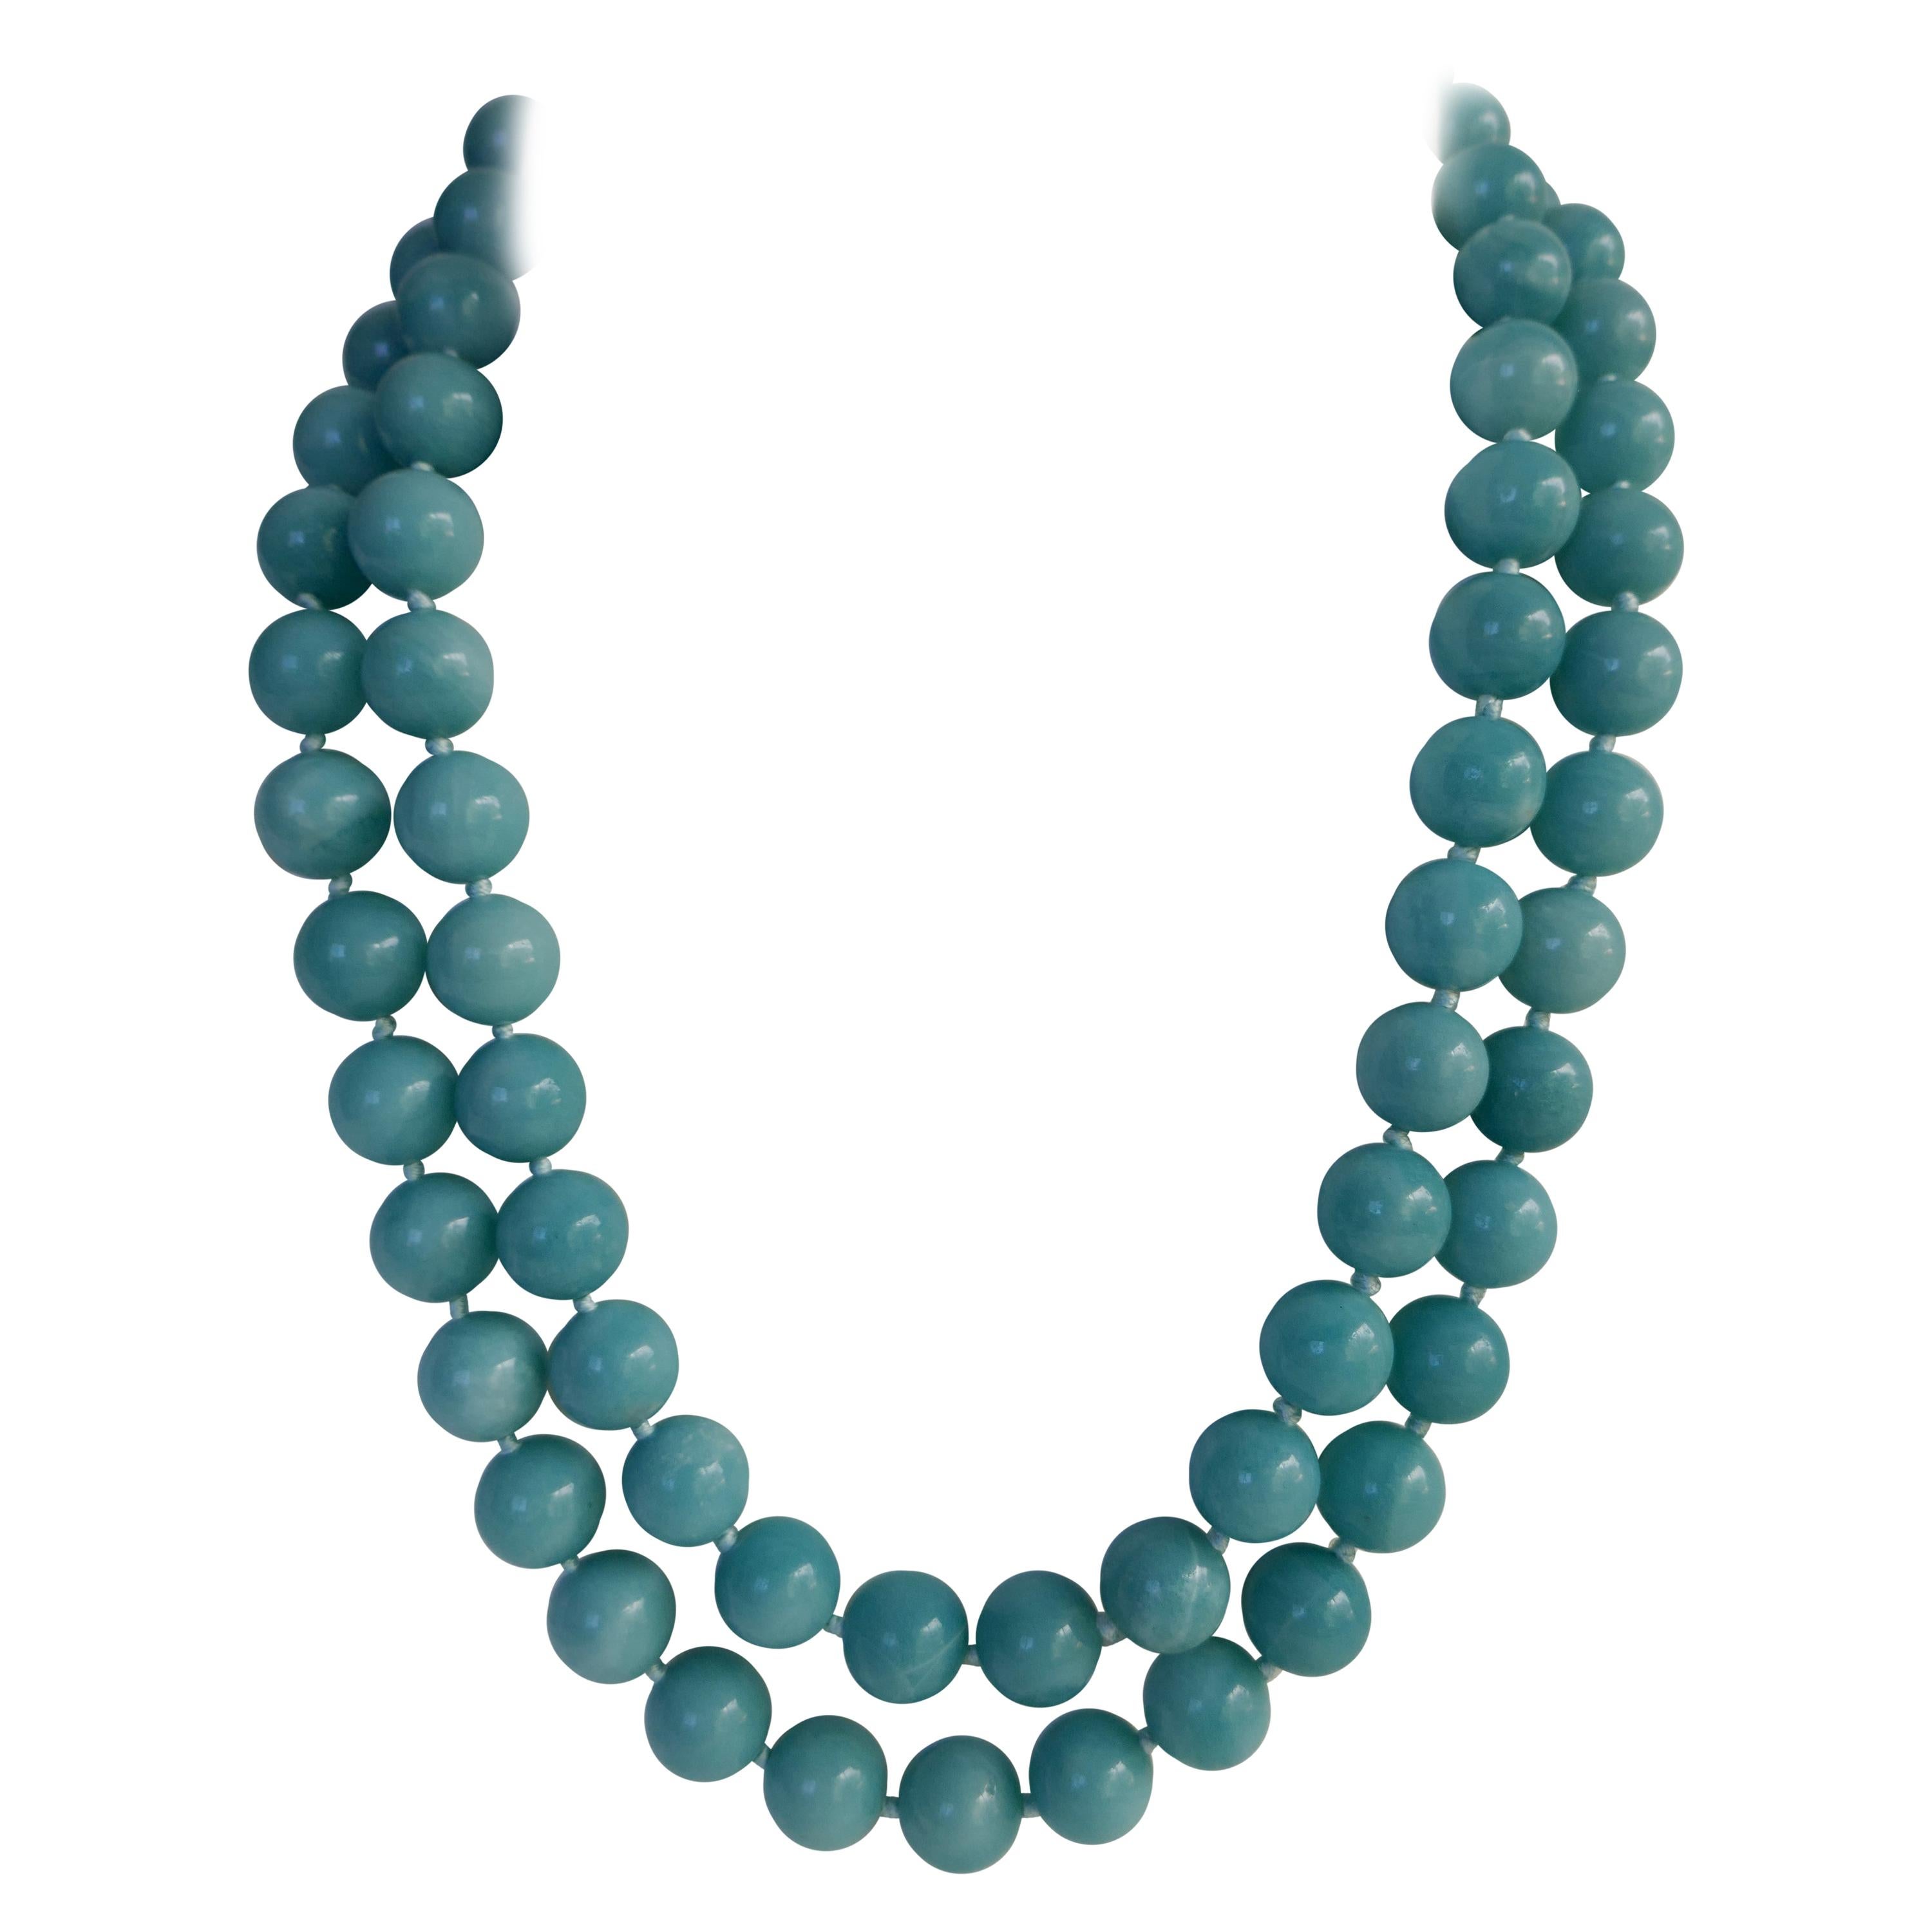 Two Strand Amazonite (turquoise color) 925 Sterling Silver Gemstone Necklace For Sale